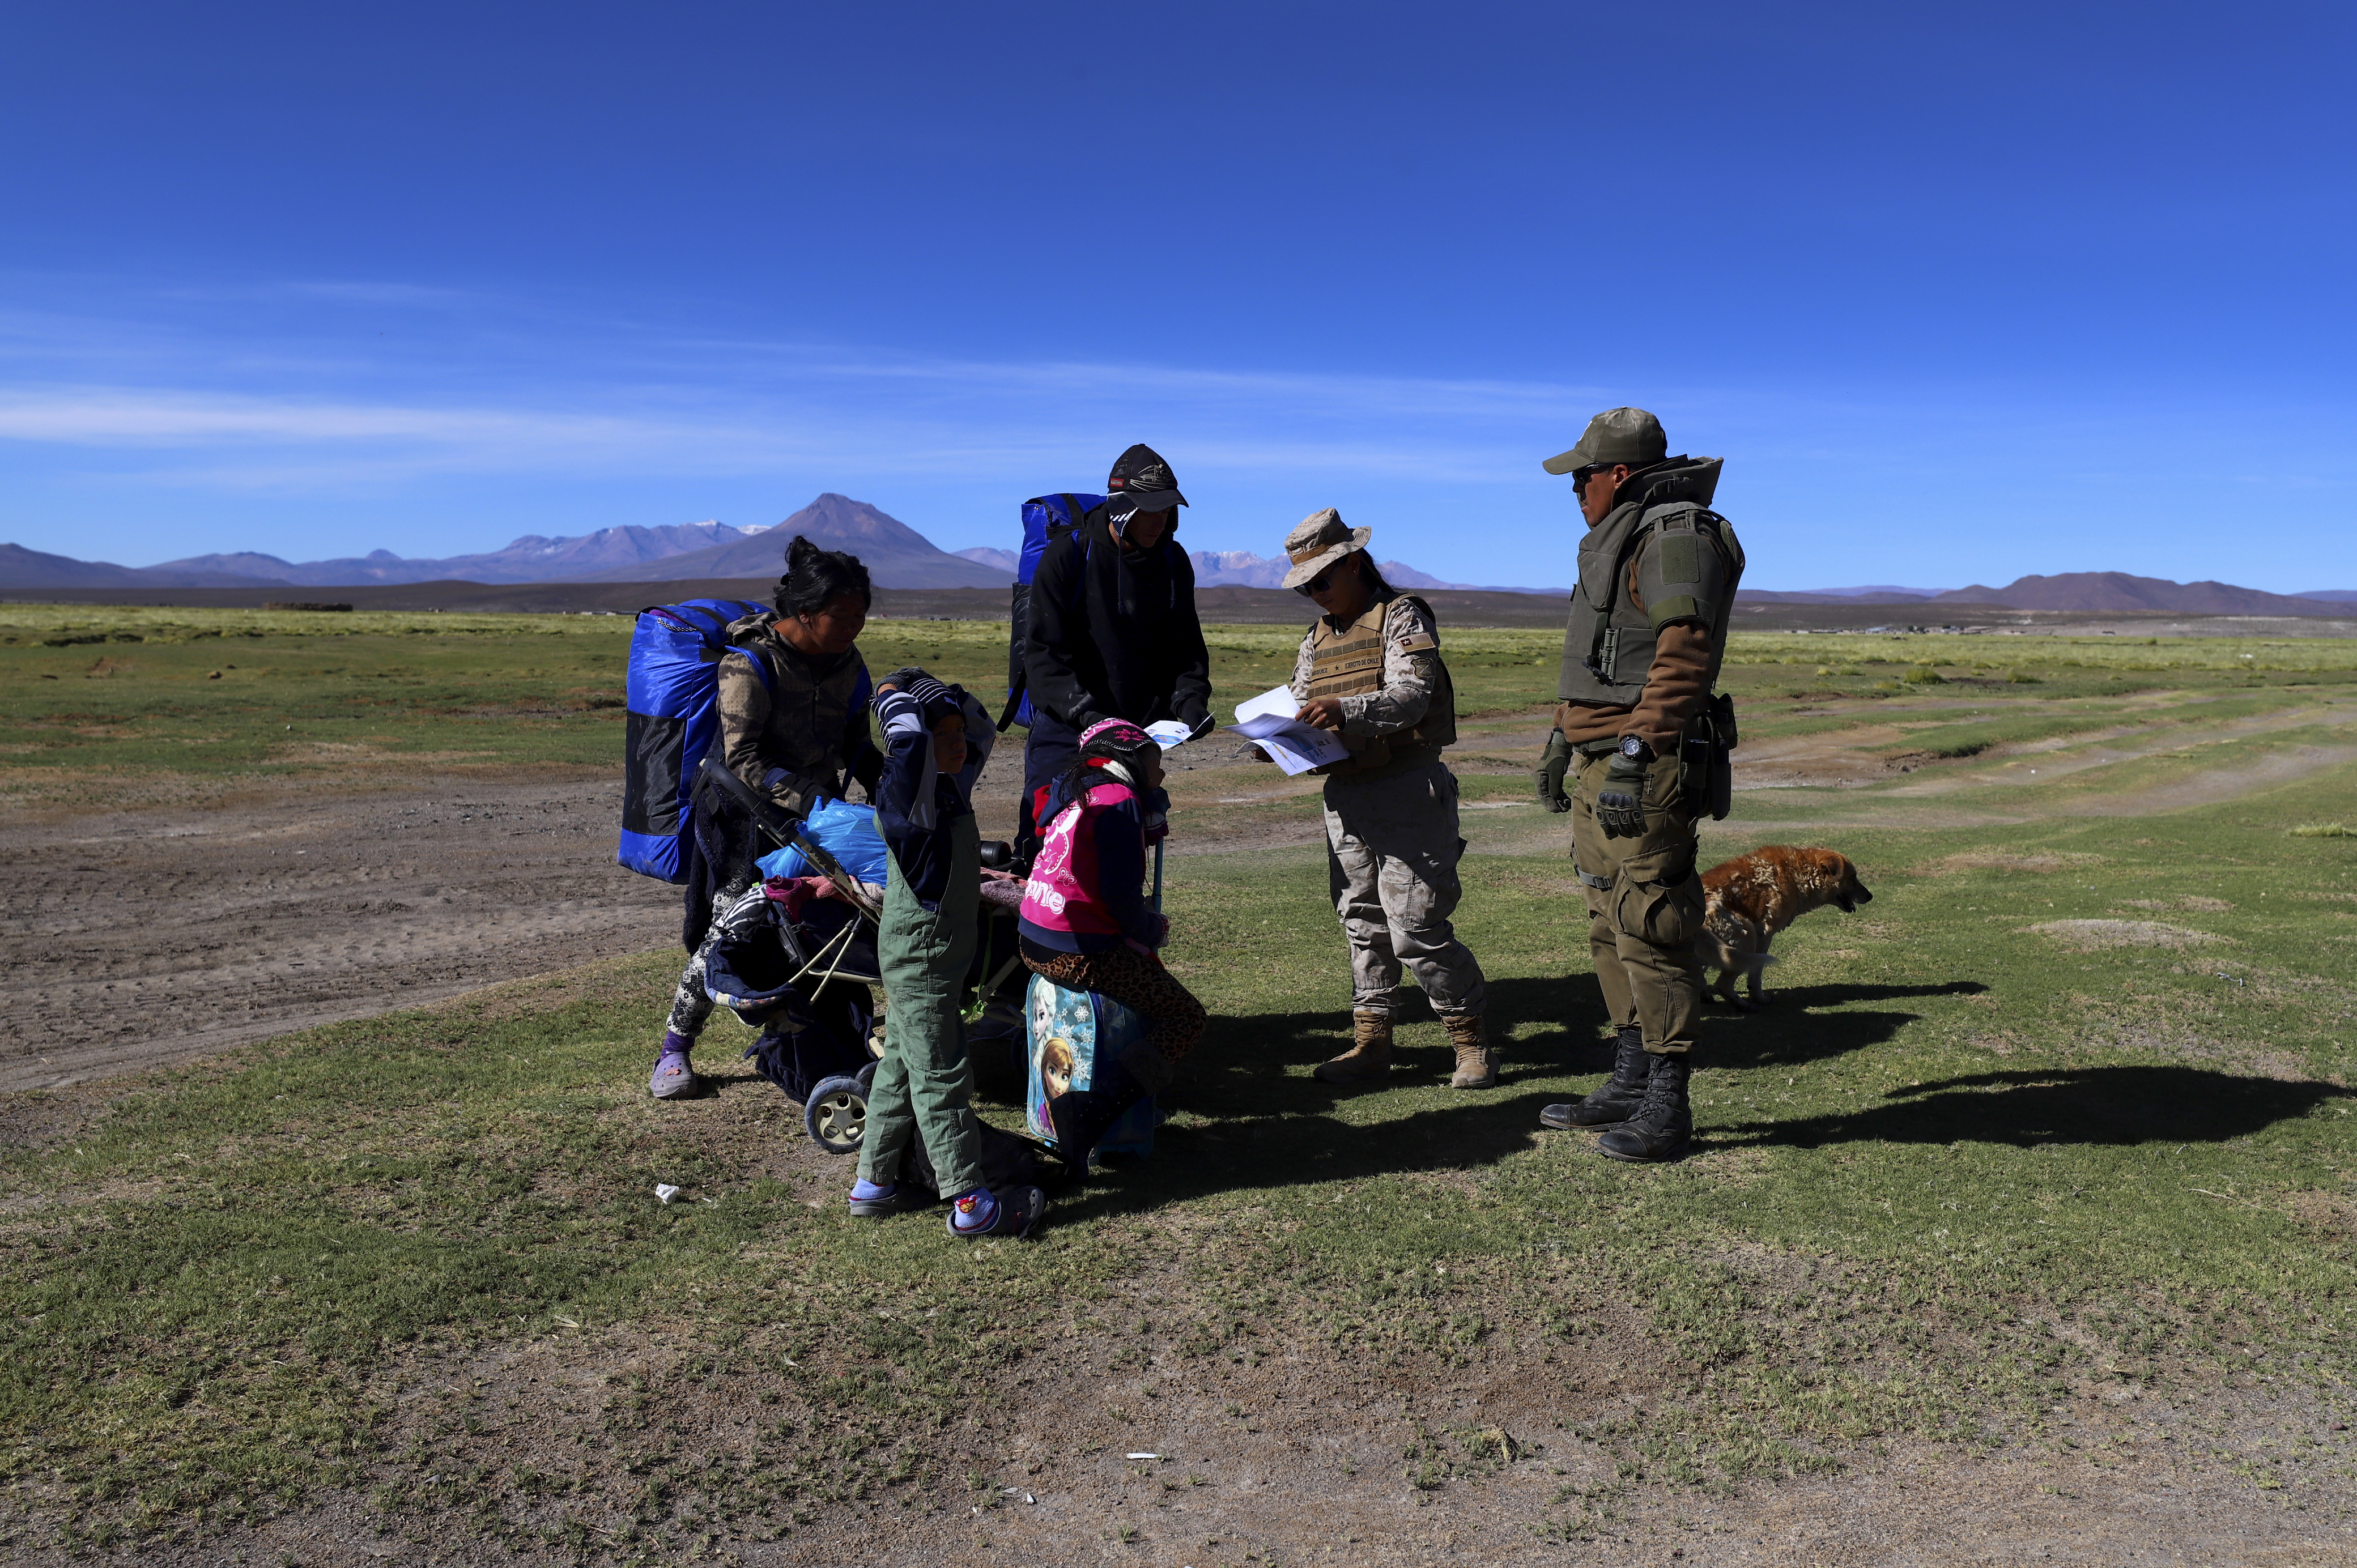 Chilean soldiers talk with migrants before taking them to a shelter where police search them, near Colchane, Chile, Wednesday, March 1, 2023. The government announced an increased military presence on the border with Peru and Bolivia. as a measure to curb illegal immigration.  (AP Photo/Ignacio Munoz)